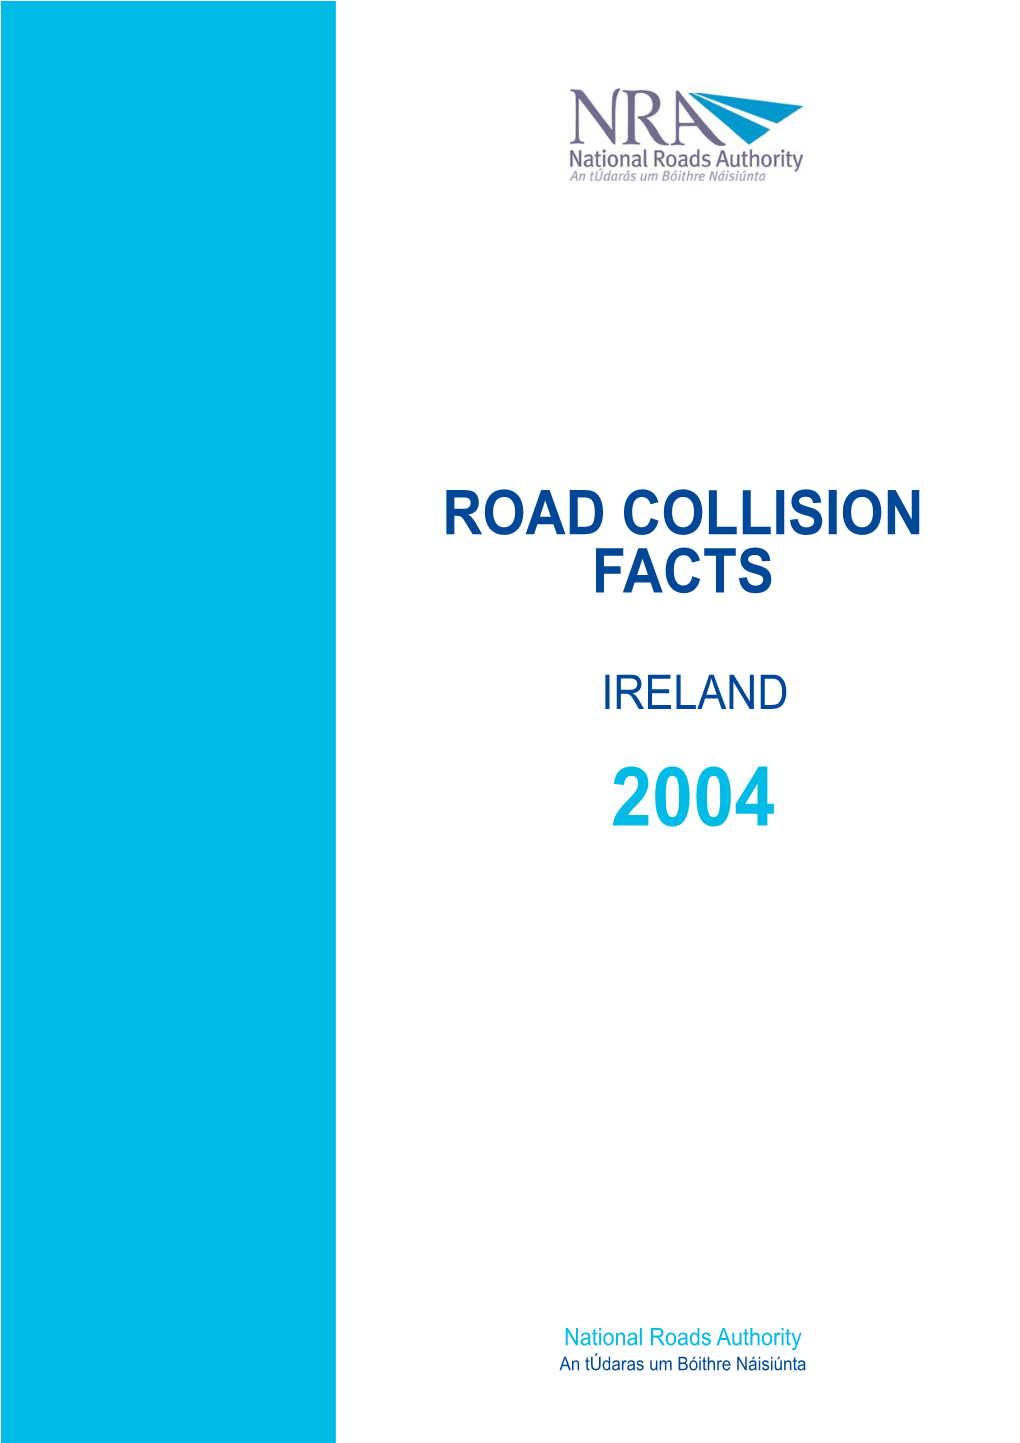 Road Collision Facts